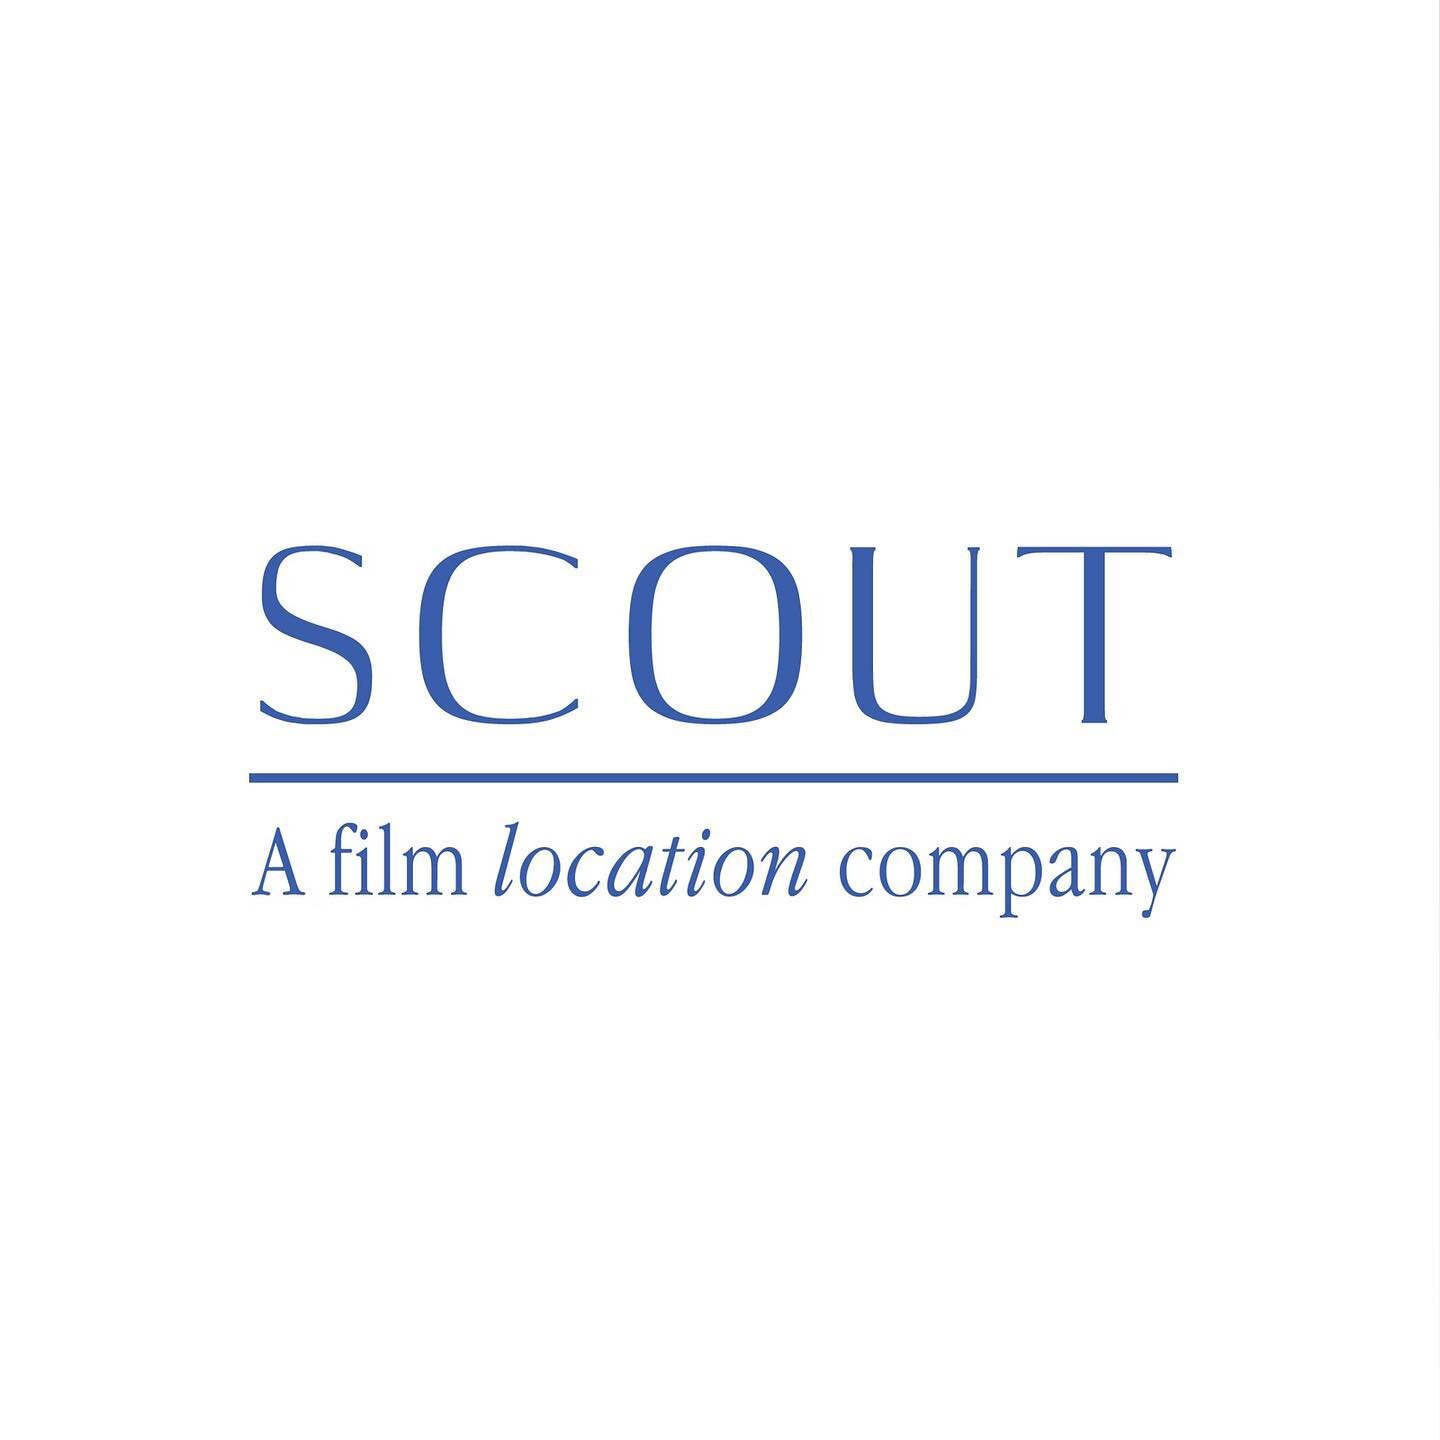 Branding highlight - Scout Locations.⁠⠀
⁠⠀
We loved bringing this location scout company to life with gradients that transport your eye from one space to the next, bold black and white photography for the cinematic element and classic typography to l